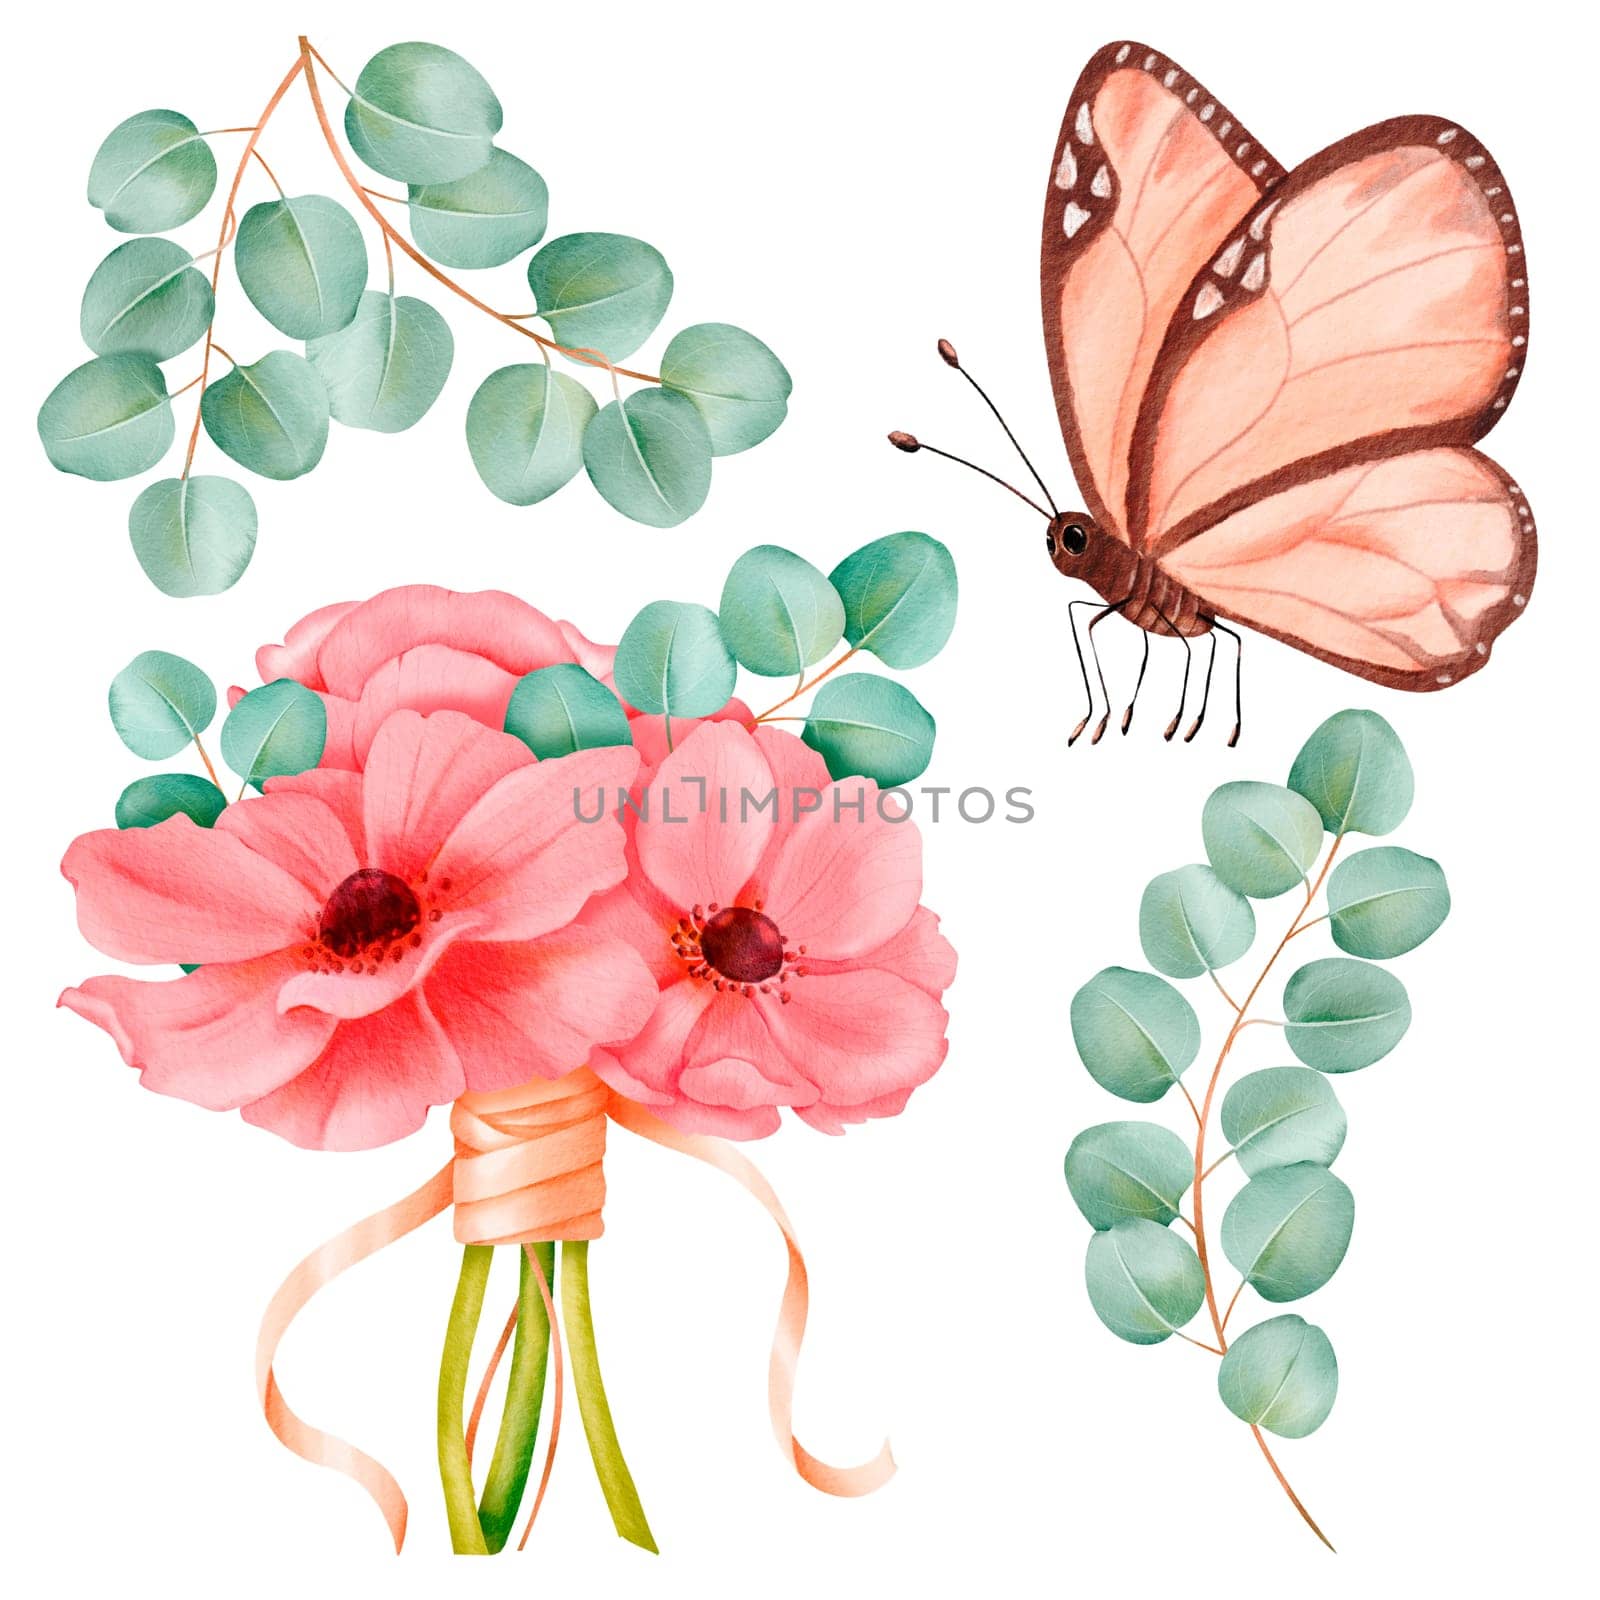 Watercolor set featuring a bouquet of pink anemones tied with a ribbon, adorned with a butterfly and eucalyptus branches. for greeting cards, stationery, wedding invitations and floral-themed designs by Art_Mari_Ka